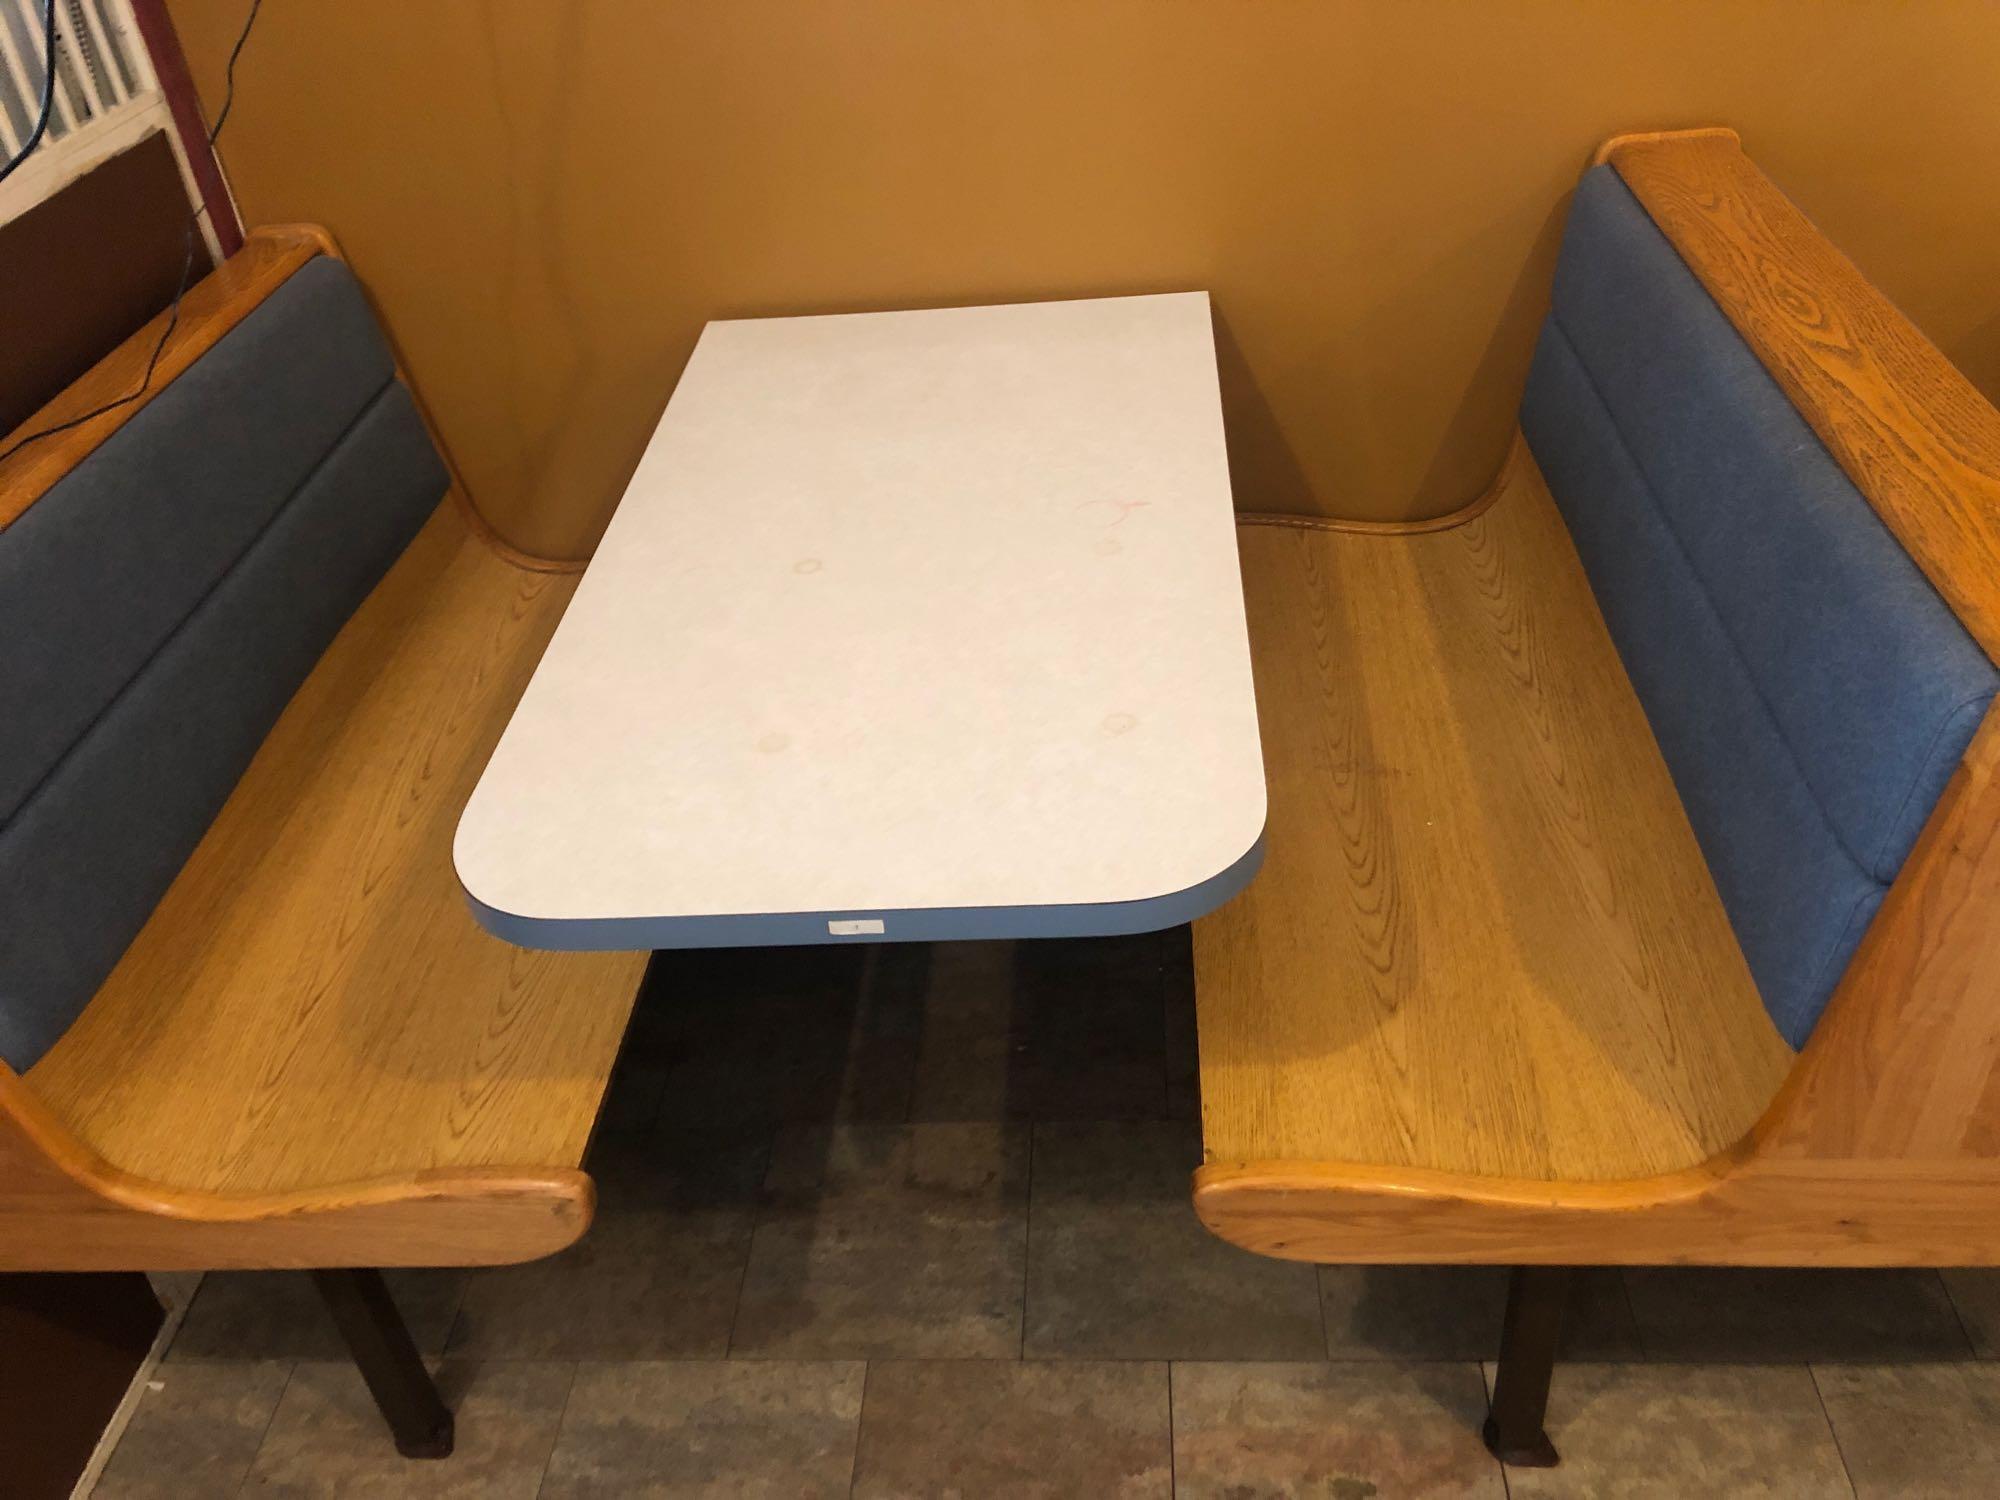 20 seat cap. restaurant booths incl. (4) back/back booths and (2) 1 sided end booths. Wood seats